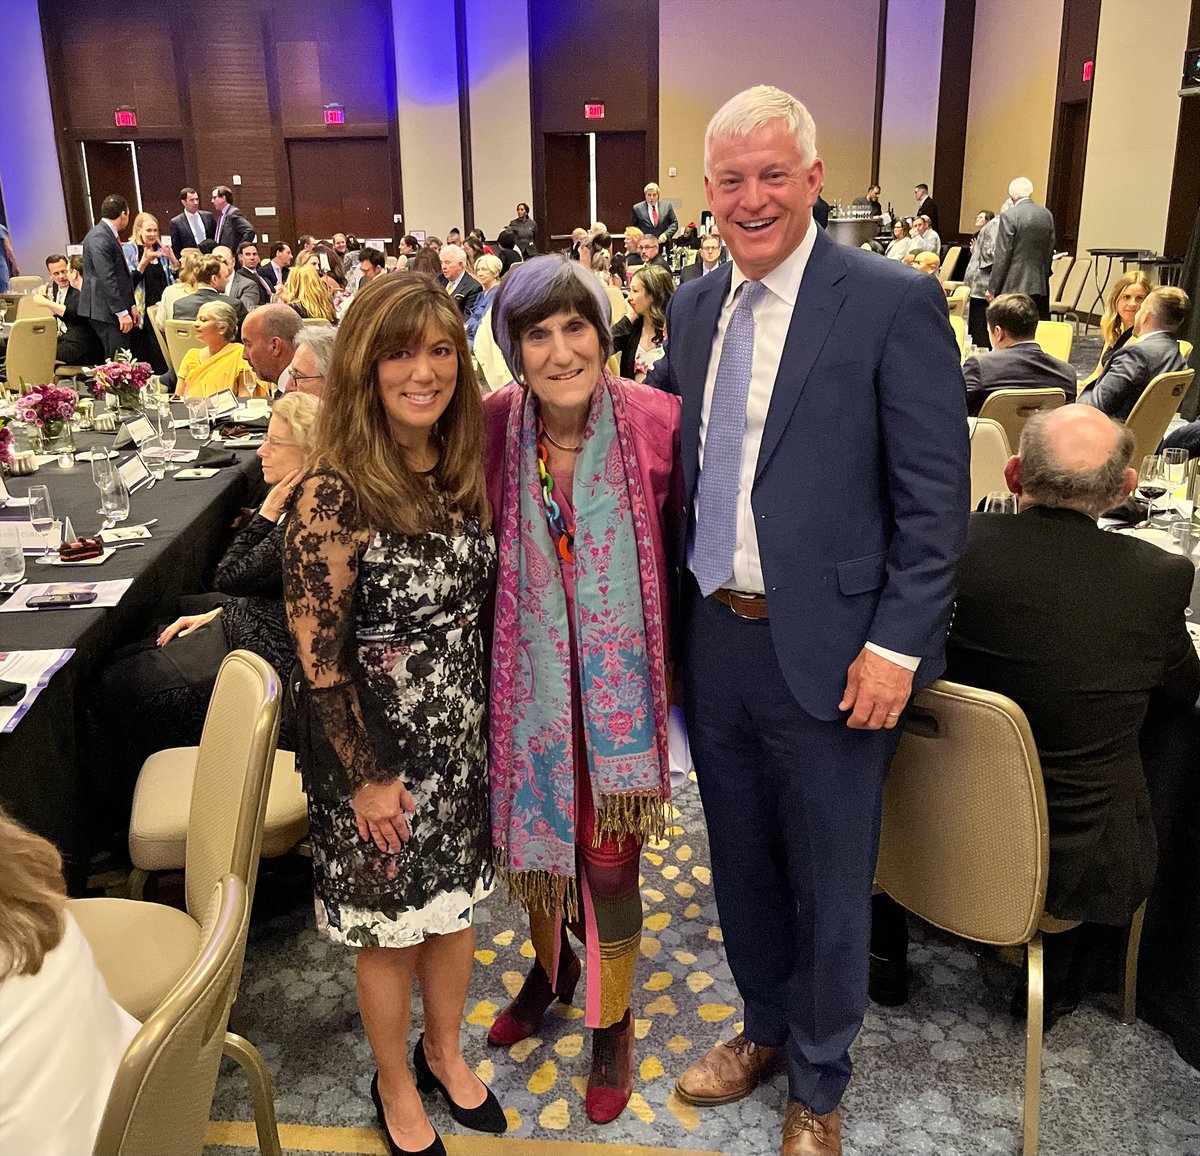 I am honored to present GLOBAL’s #AcceptAbilityGala DeLauro & Cole scholarship awards to Damani & Julia. It is vital we continue investing into #downsyndeomresearch particularly the NIH’s INCLUDE Project that @TomColeOK04 & I started funding in 2018 and increased over the years.